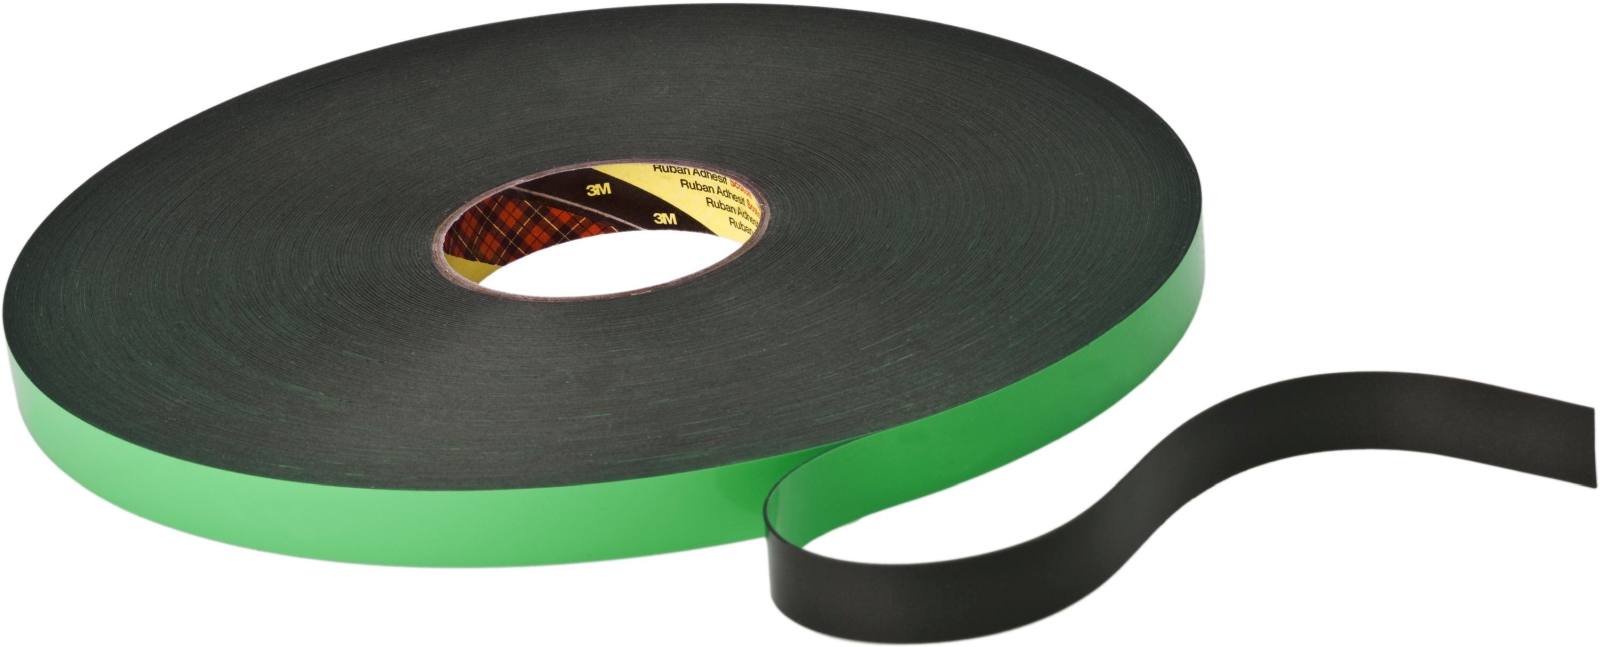 3M Double-sided PE foam tape with acrylic adhesive 9515B, black, 25 mm x 33 m, 1.5 mm